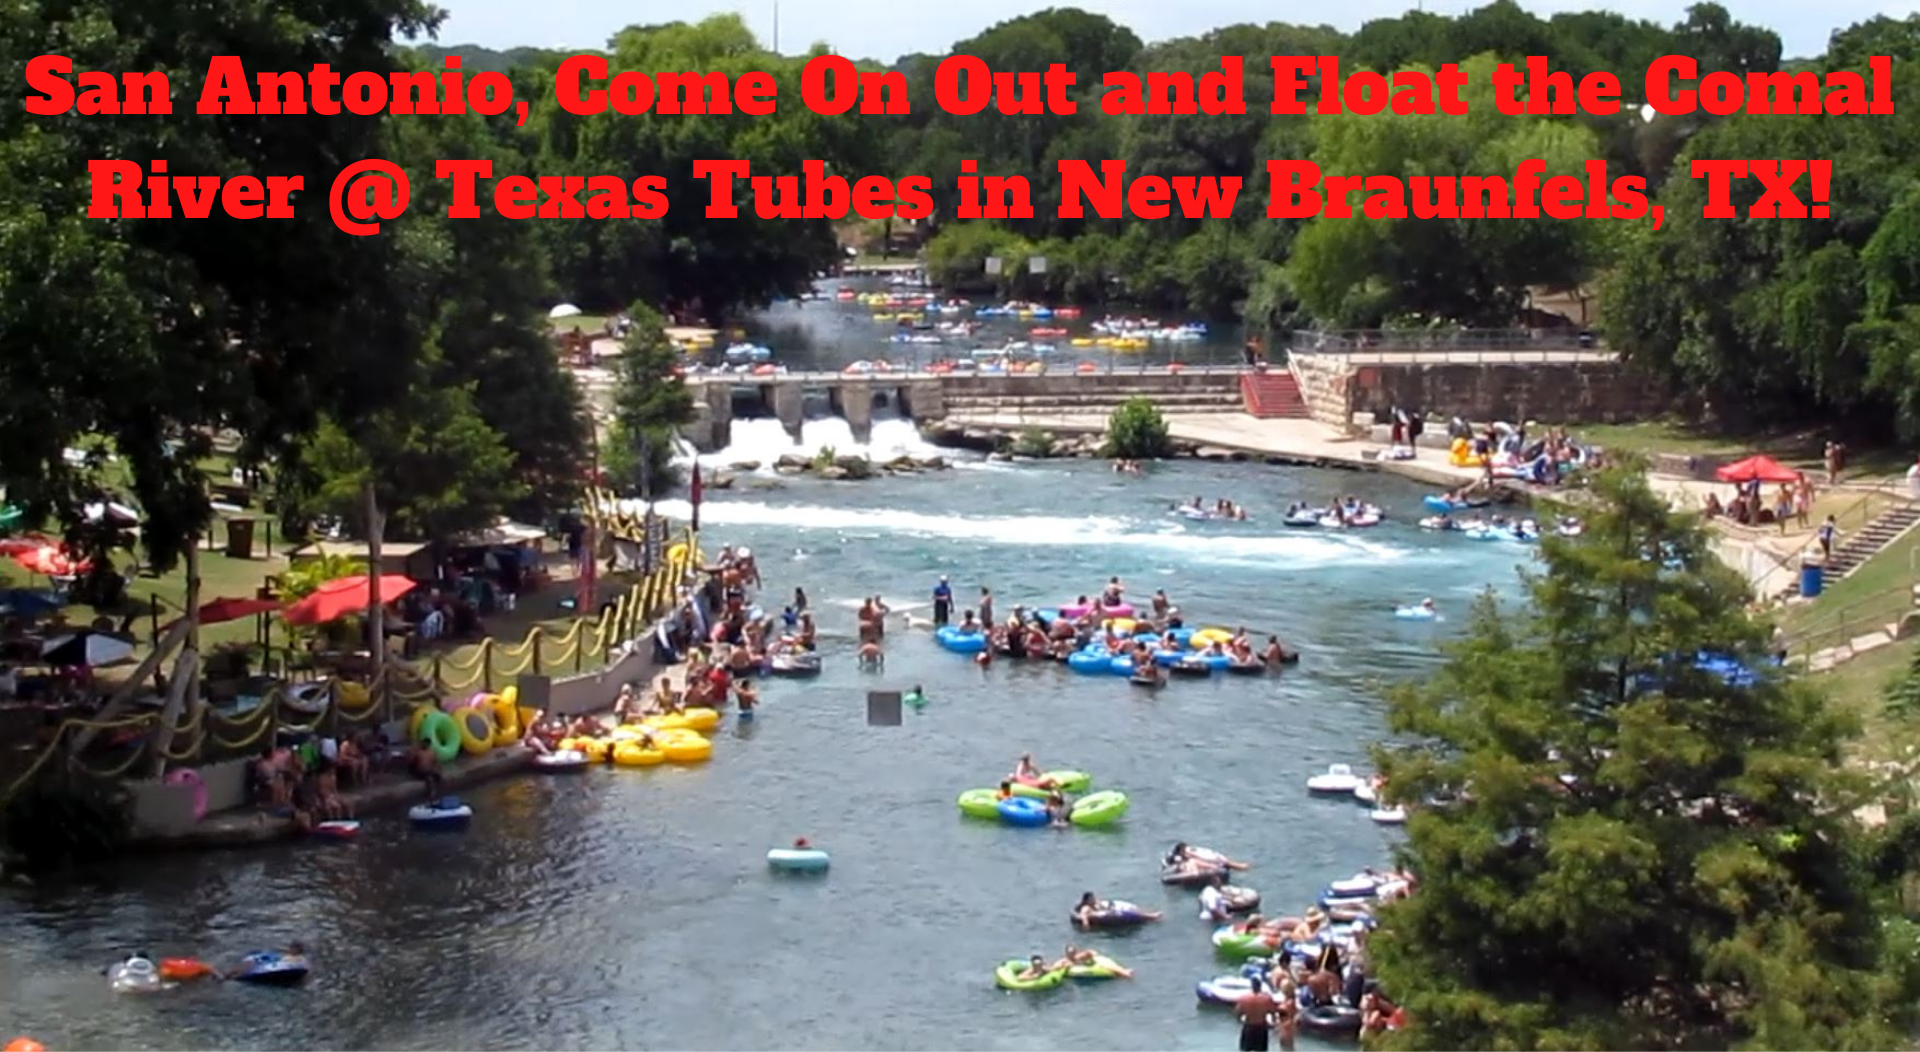 Next best thing to Float Trips in San Antonio, float trips on the beautiful Comal River in New Braunfels,  at Texas Tubes!